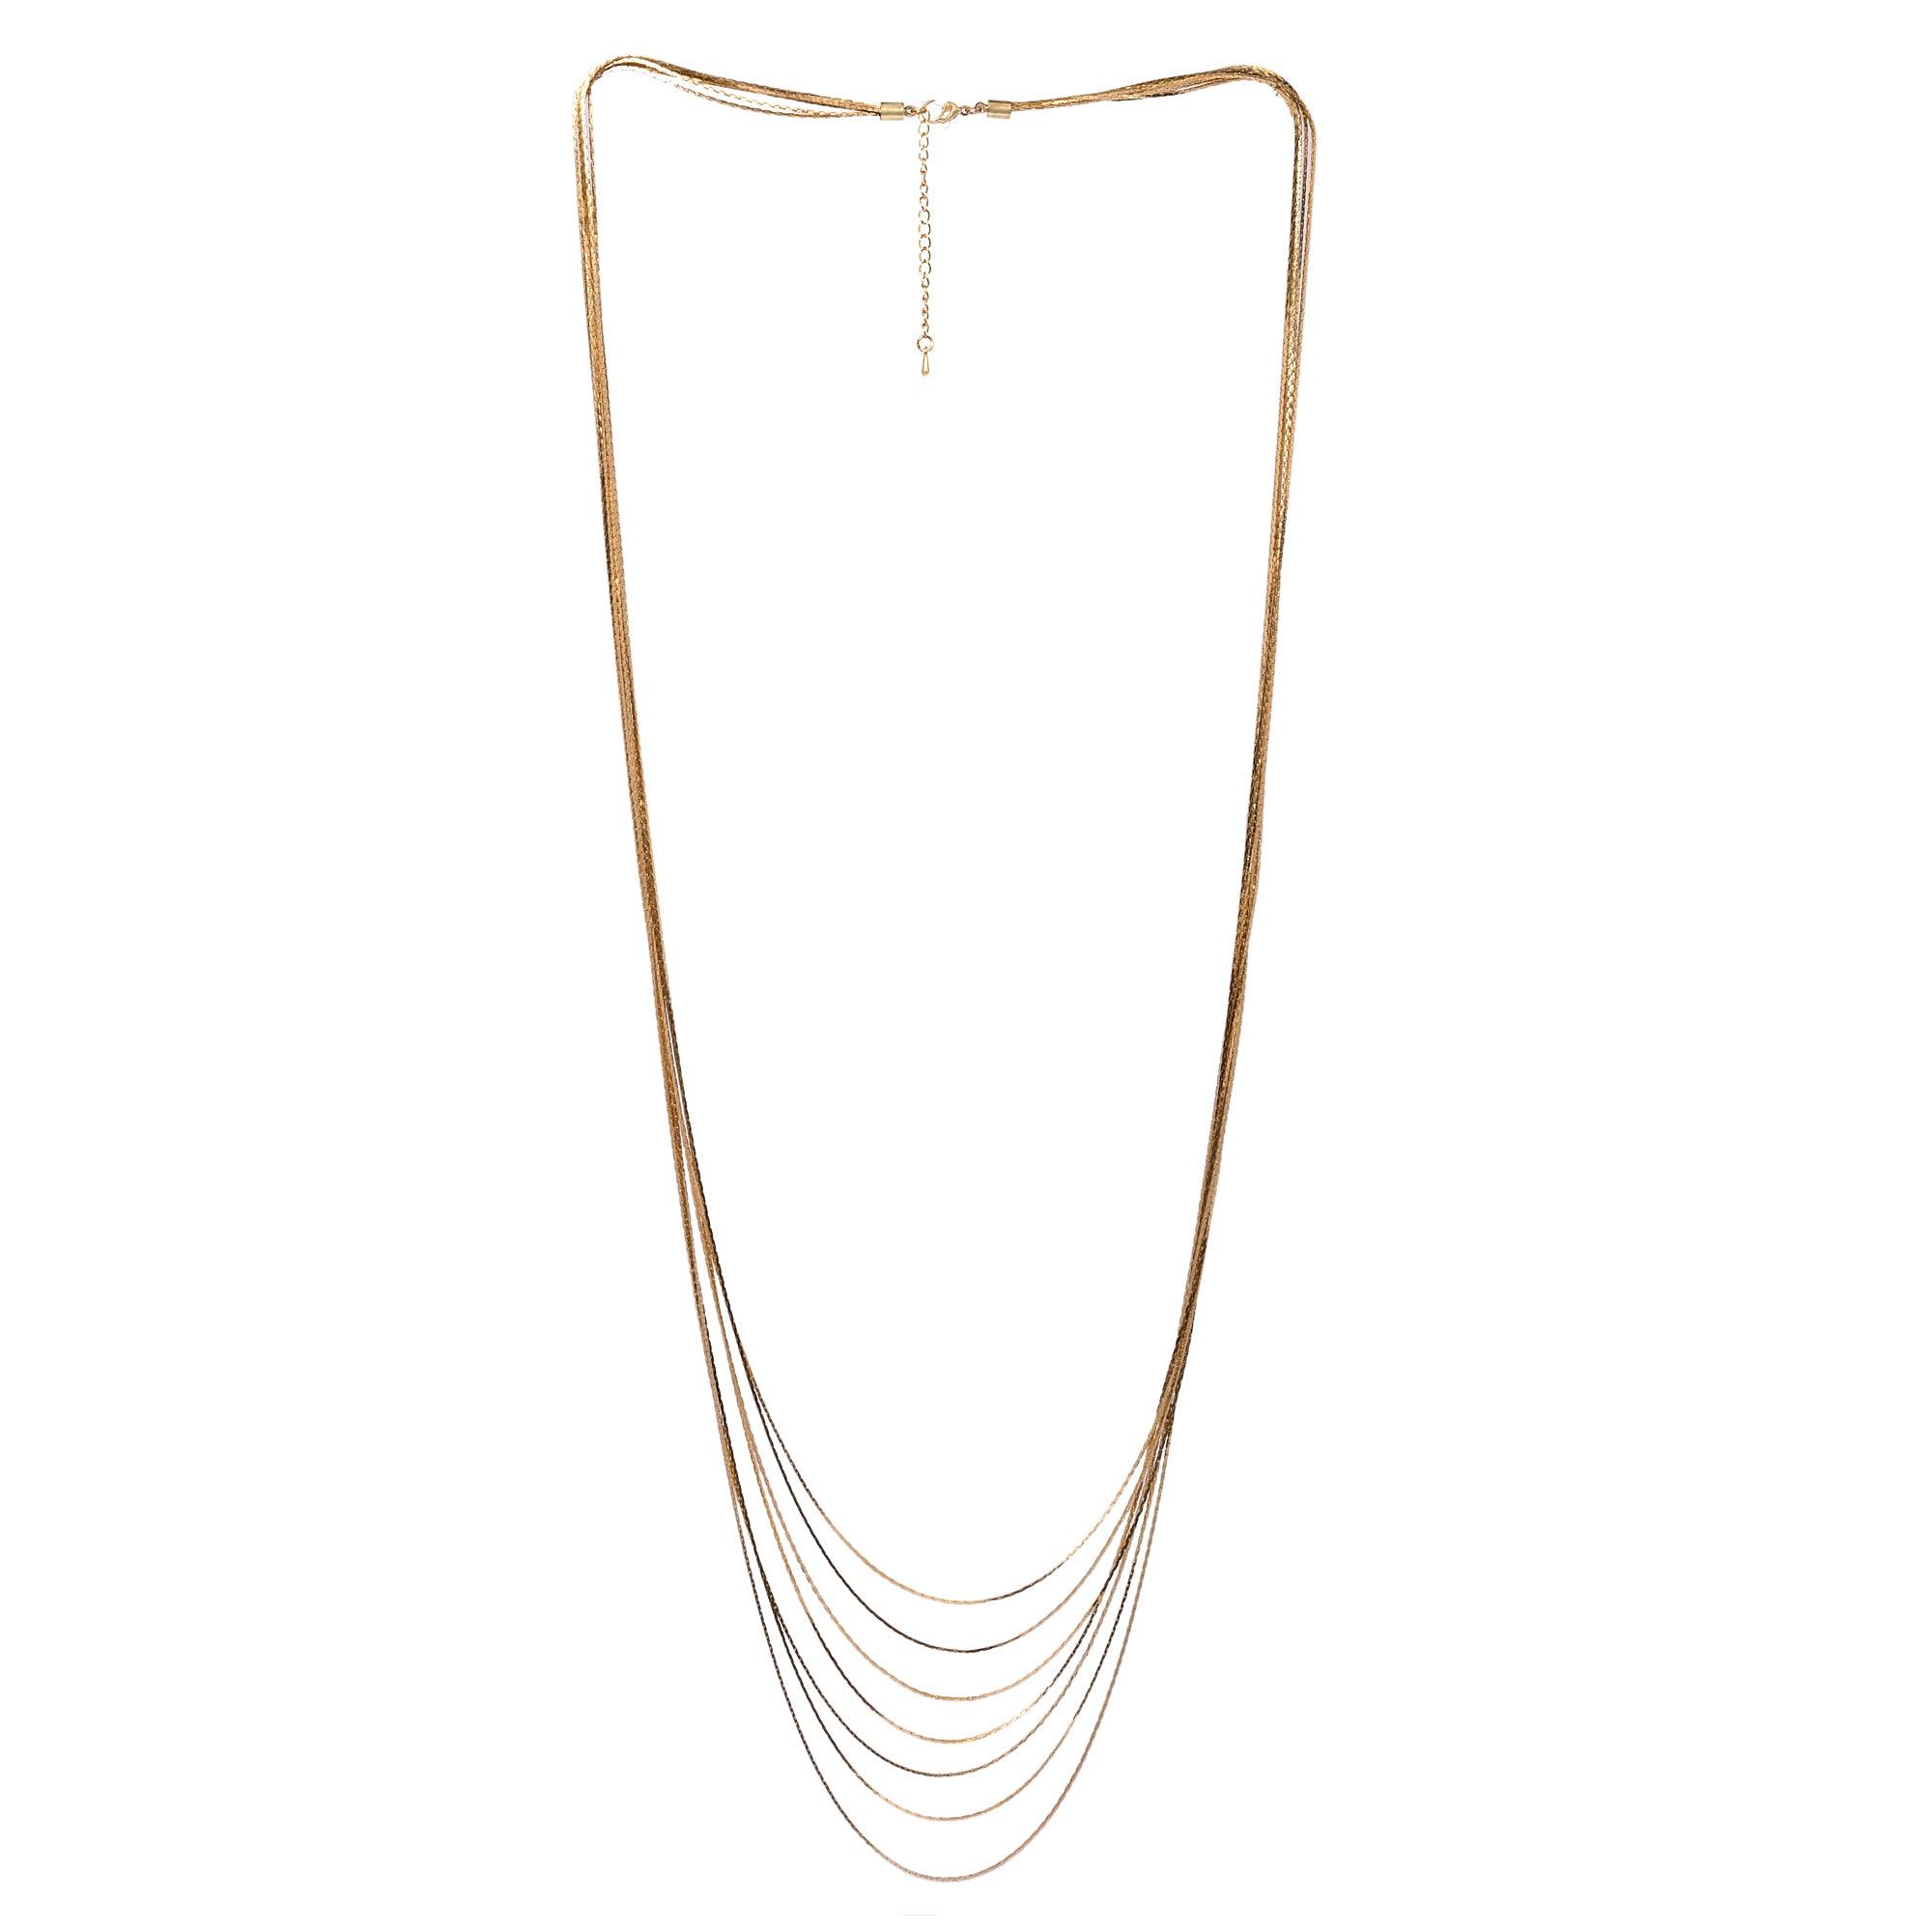 Multilayer Golden Fashion Necklaces - The Fineworld